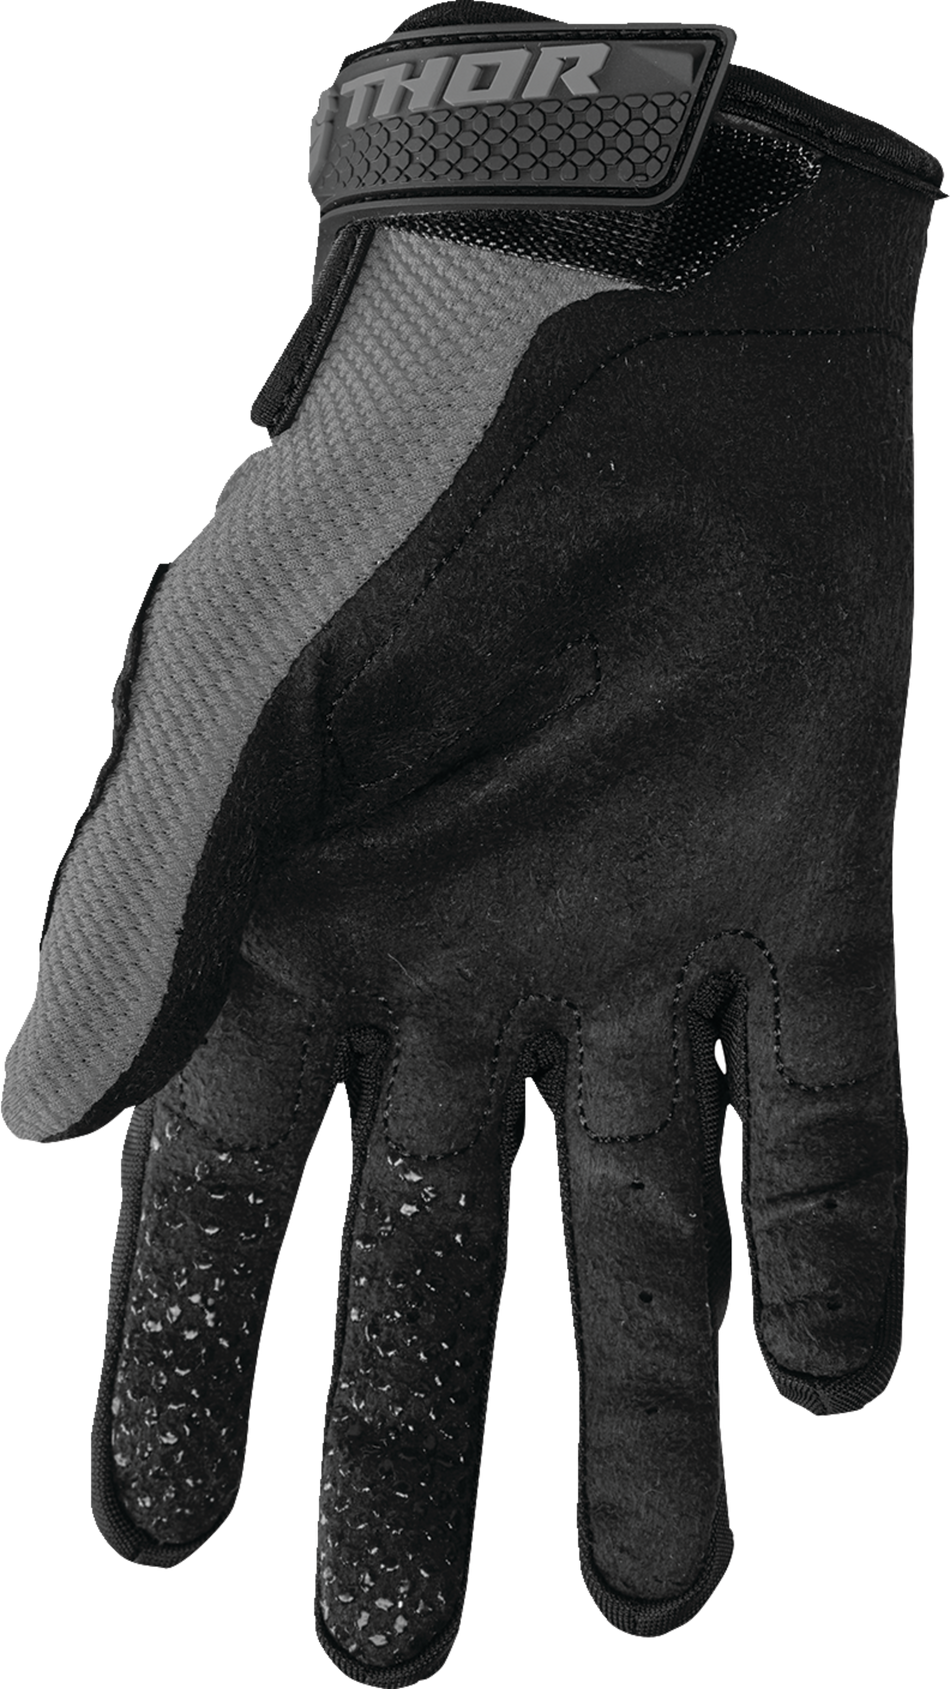 THOR Sector Gloves - Gray/White - Large 3330-7276